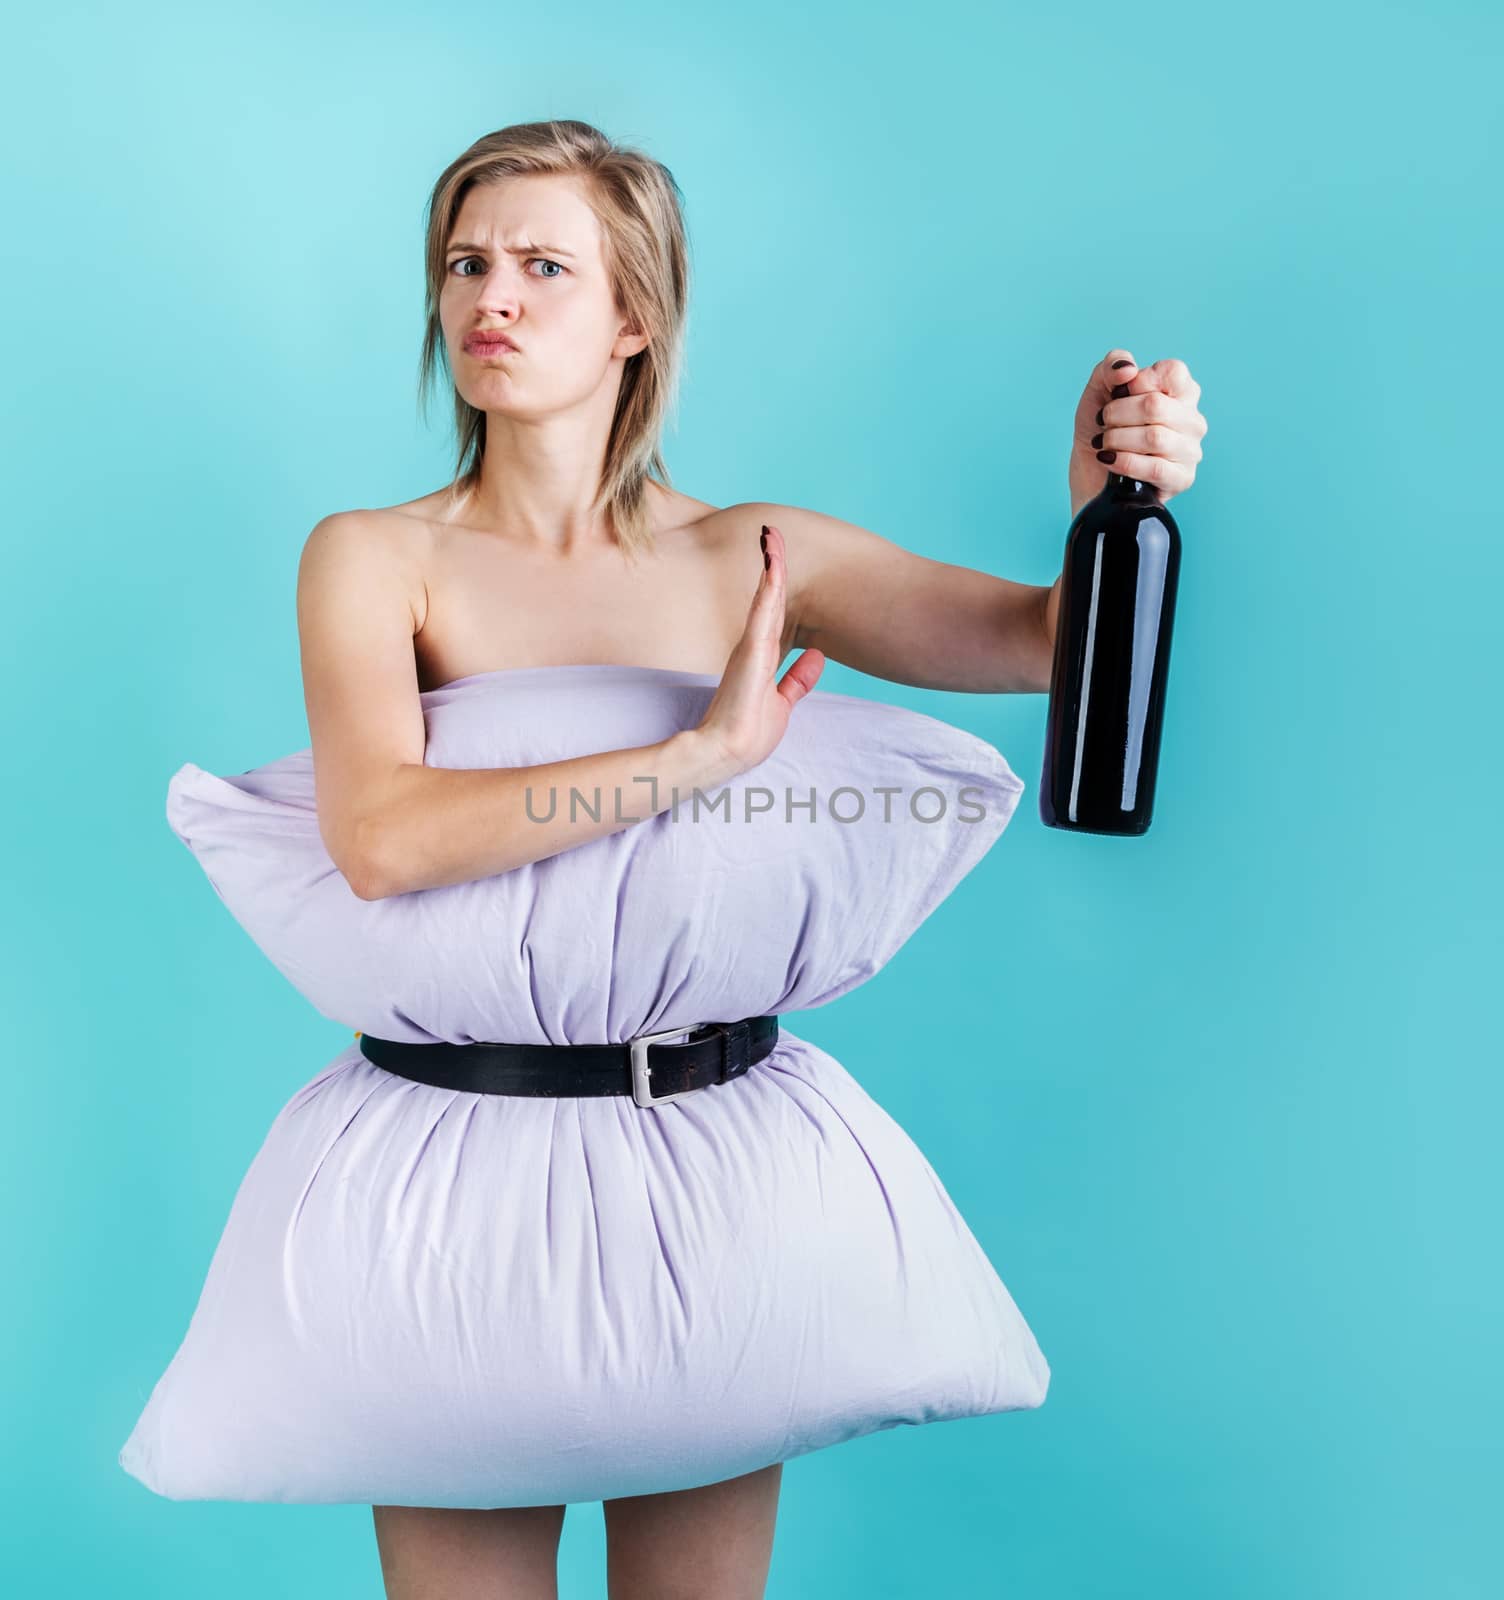 Blonde woman in pillowdress holding a wine bottle showing denying gesture isolated on blue background by Desperada